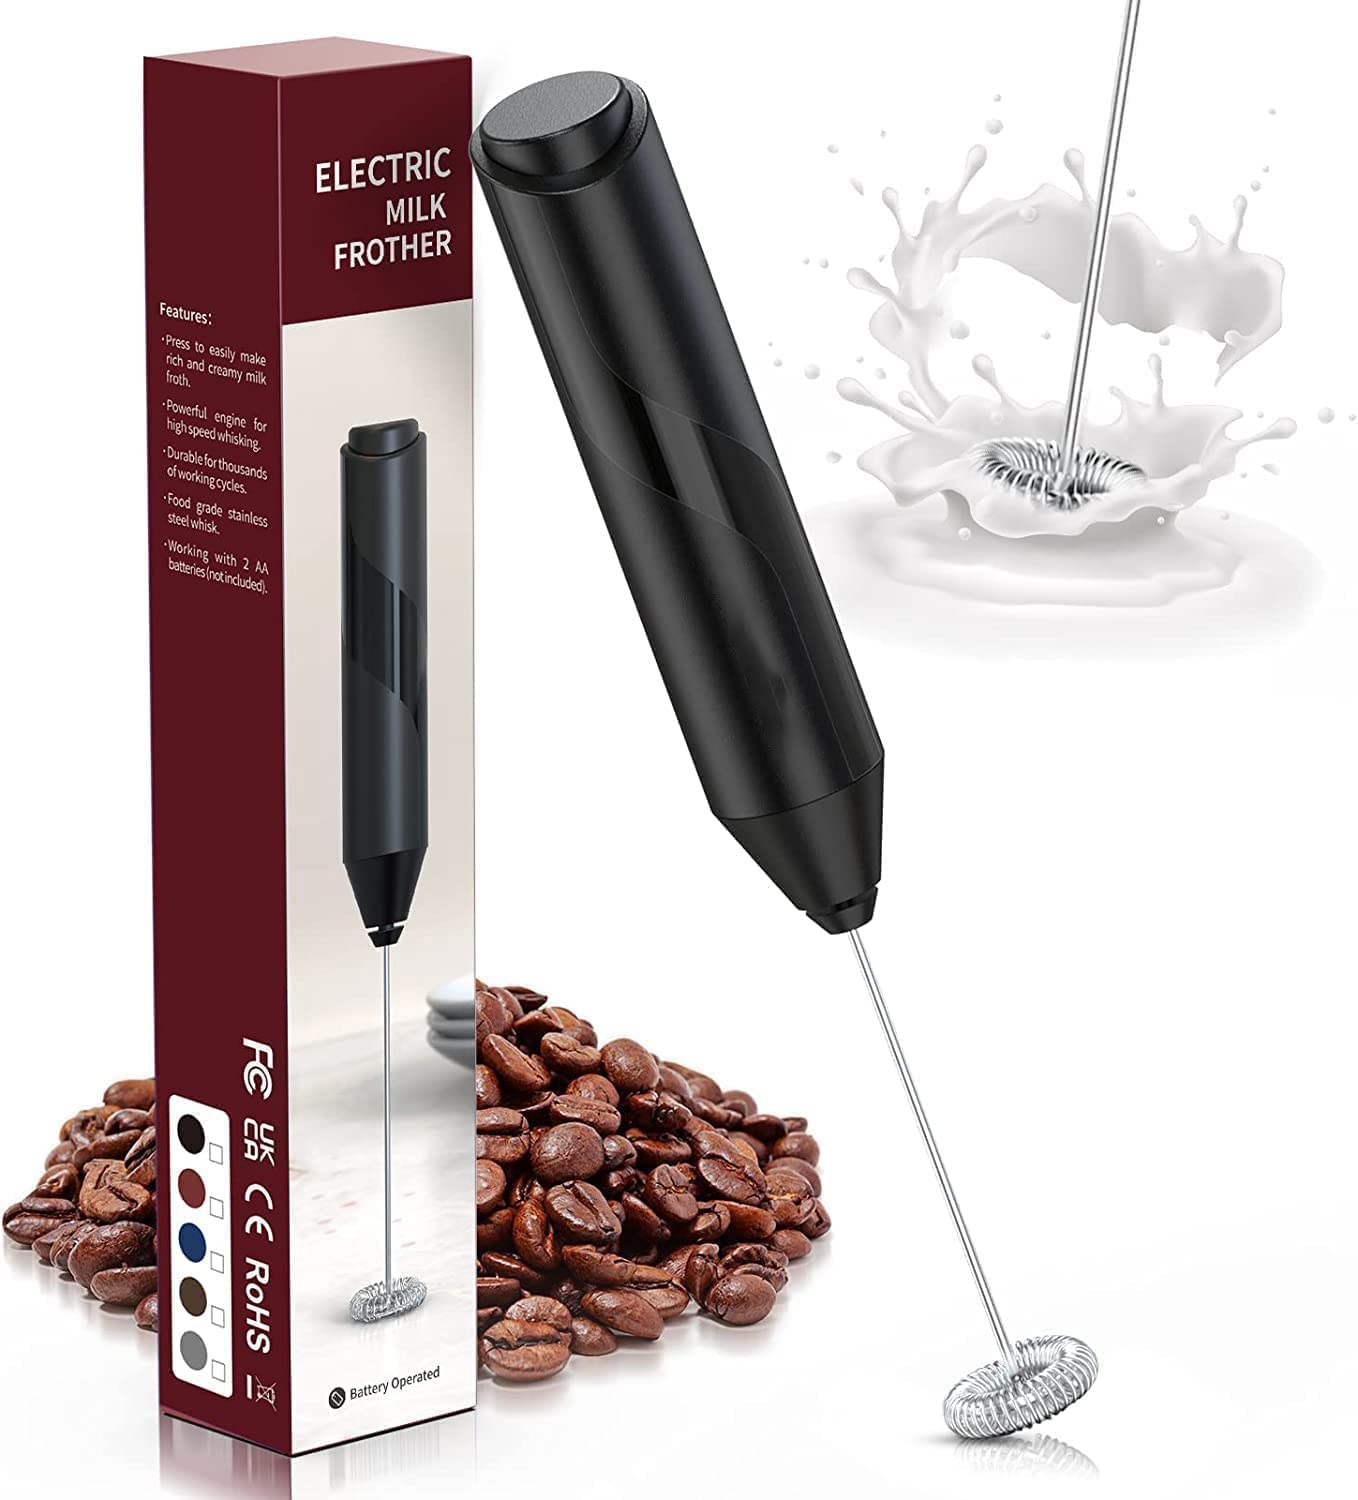 VIO Electric Milk Frother Handheld with High Motor, Mixer with Food Grade Stainless Steel Stirring Head, for Latte, Cappuccino,Drinks,Hot Chocolate. (Black)